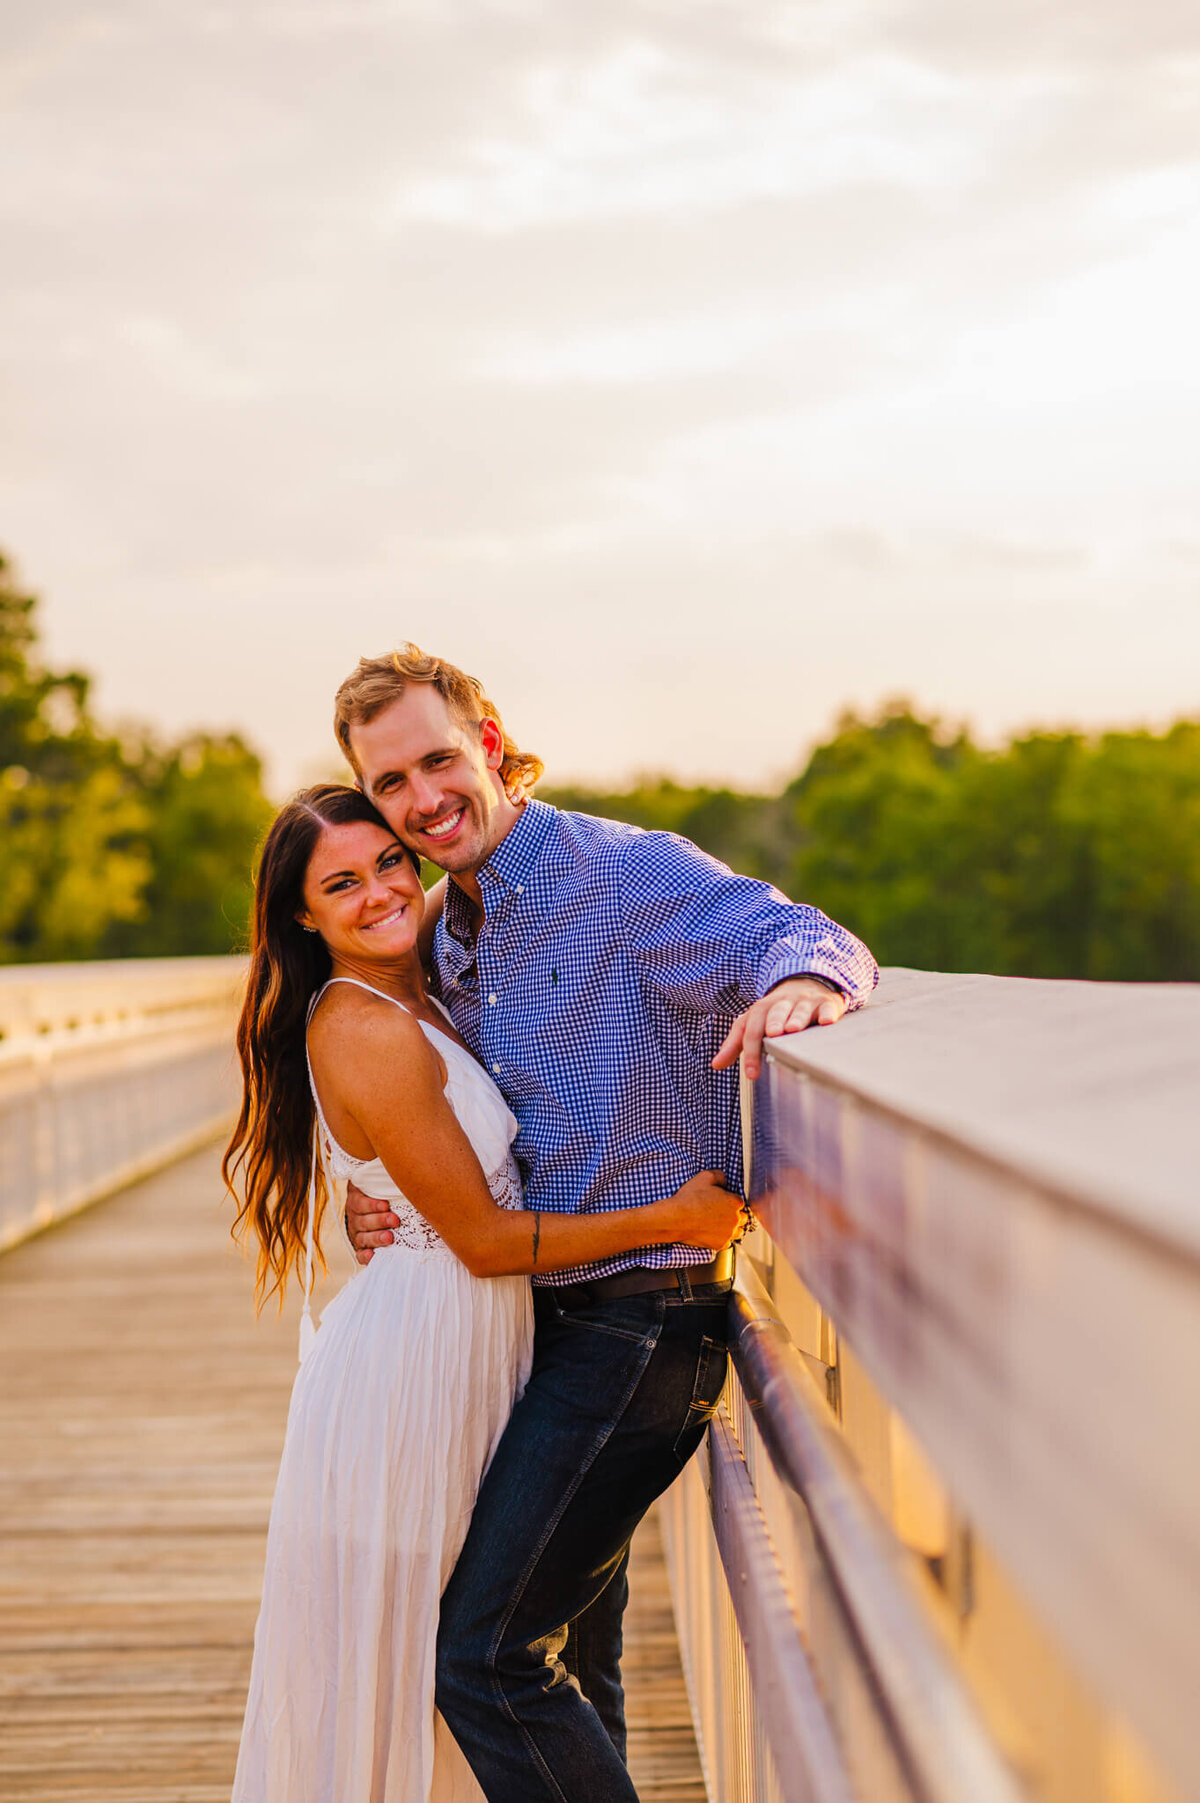 photo of a man and woman hugging and smiling on a white bridge